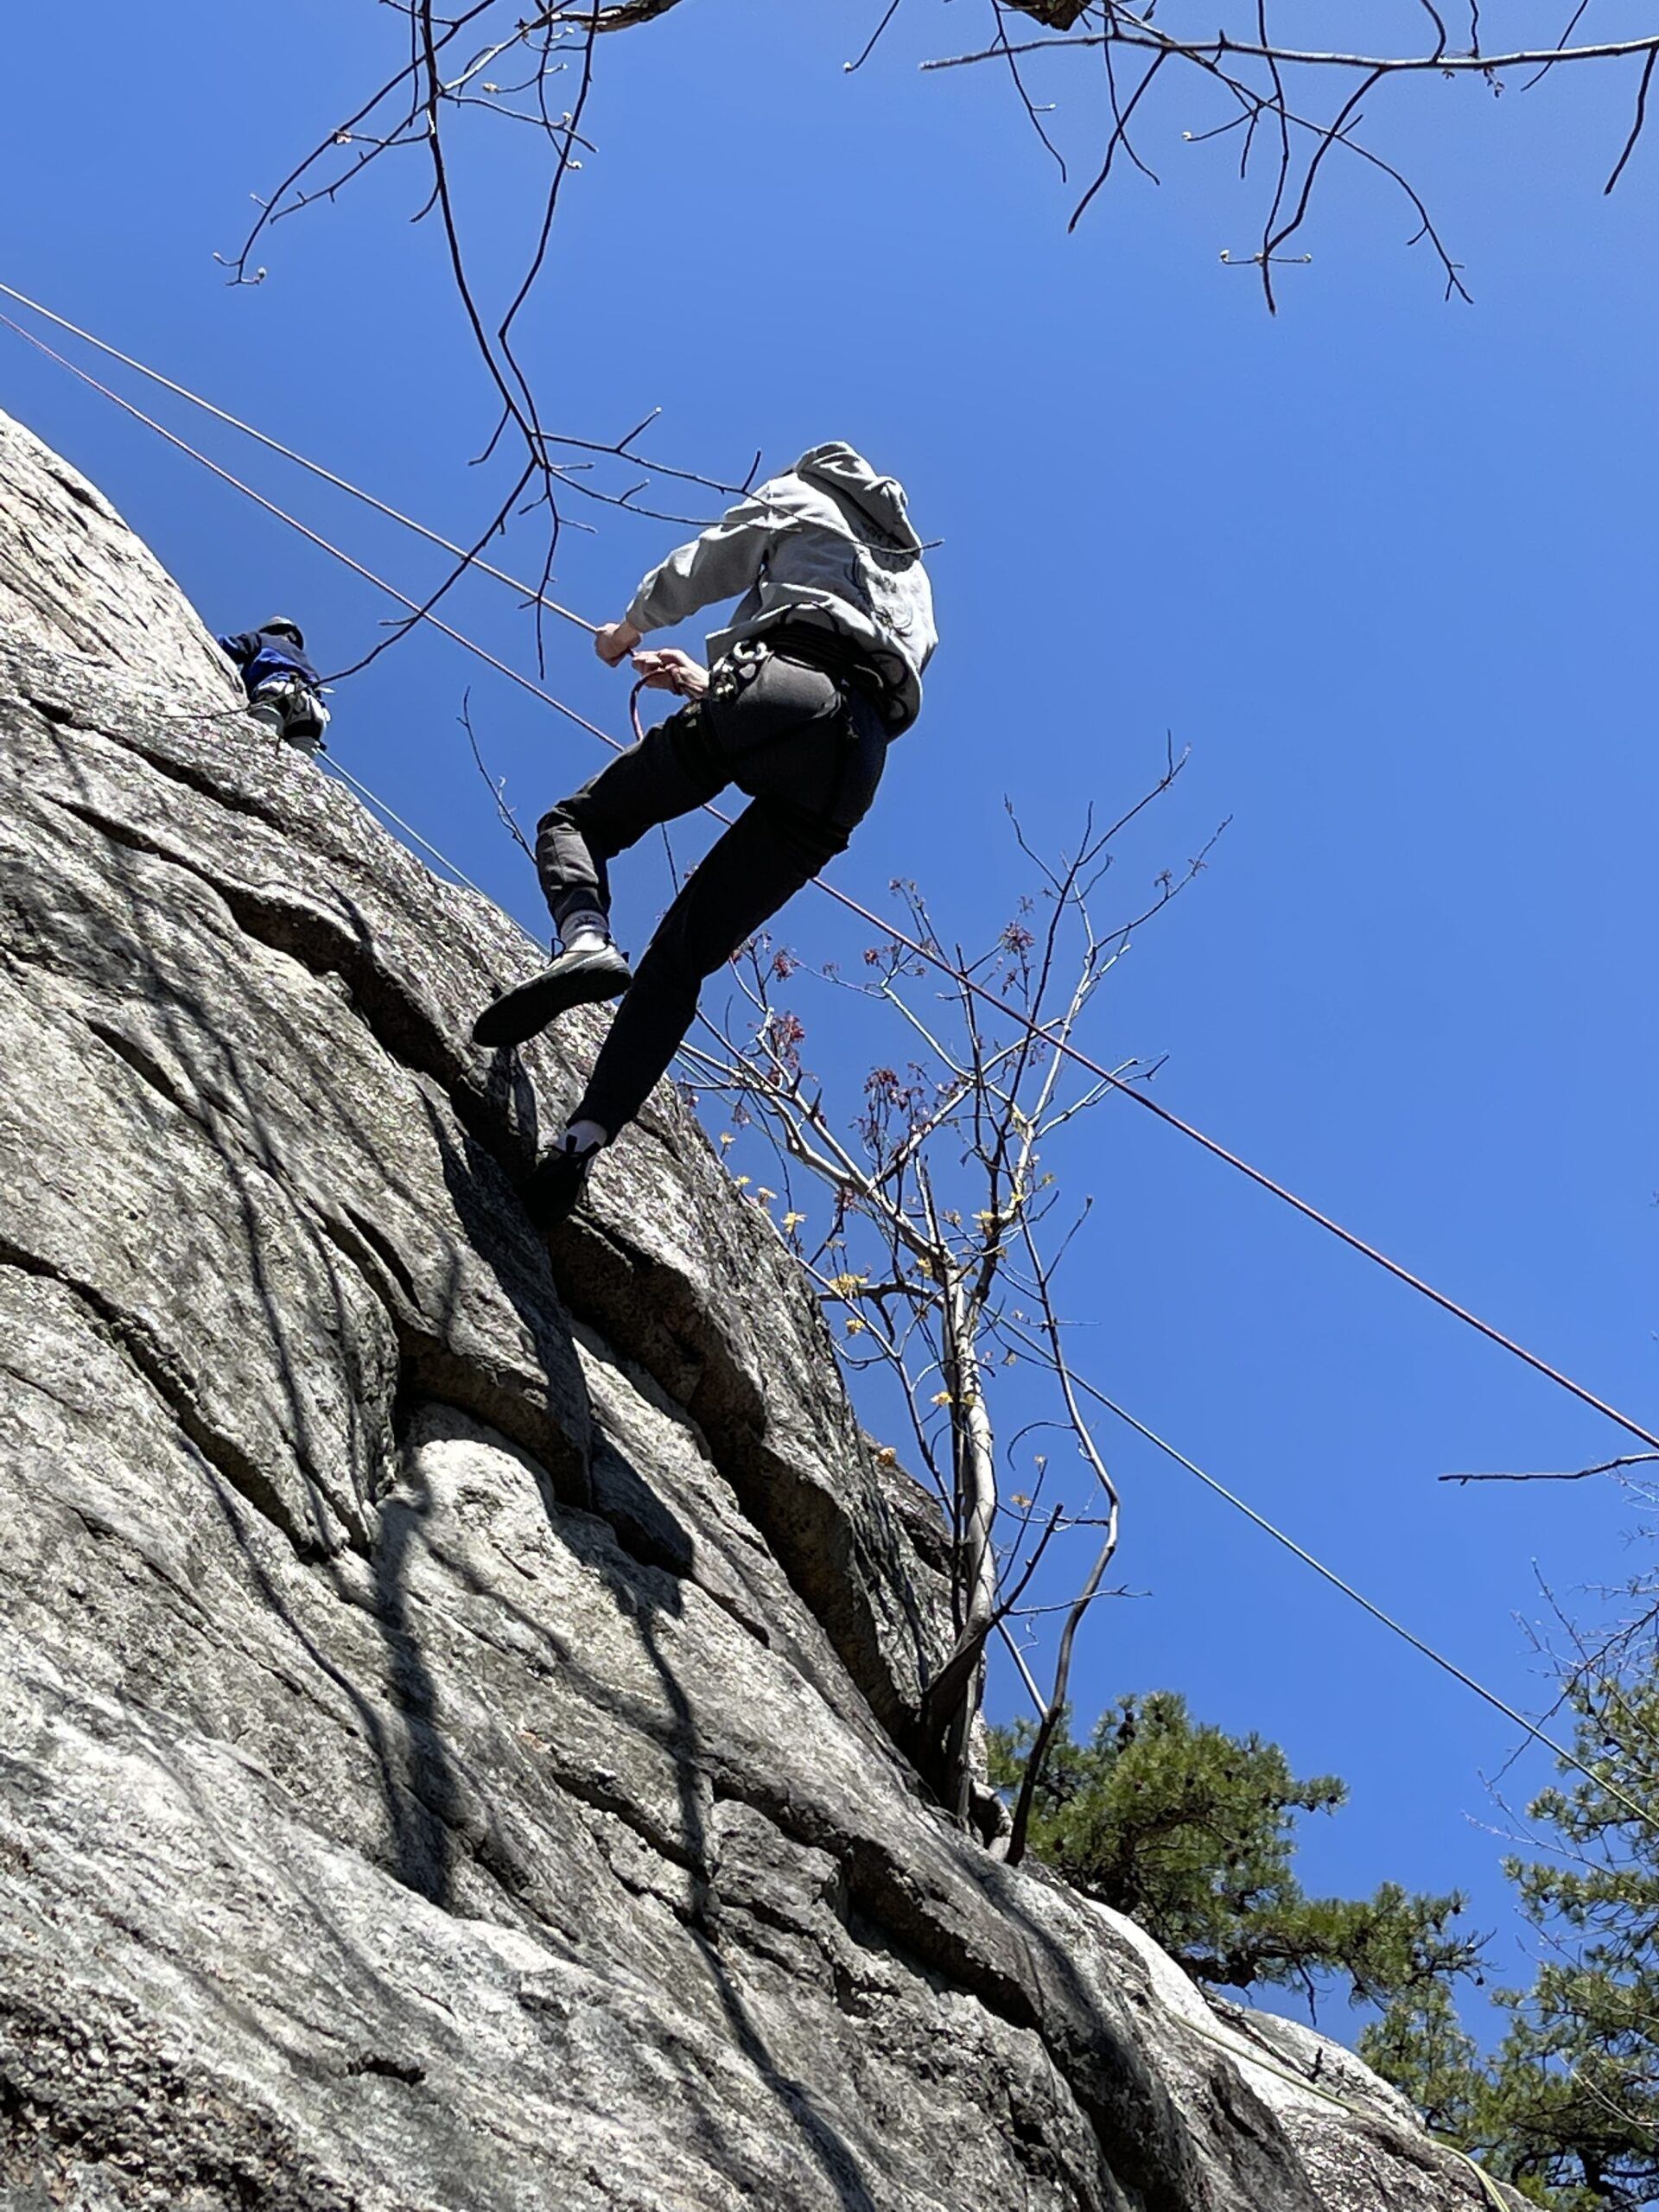 Scout Troop 455 ventured to New Paltz to climb “the Gunks” (Shawangunk Mountains) last week with five Scouts and four leaders attended the event that comprised vertical climbing and rappelling down a 90-foot shear rockface.  Following the climb, the Scouts camped overnight and returned home on Sunday.  COURTESY SCOUT TROOP 455